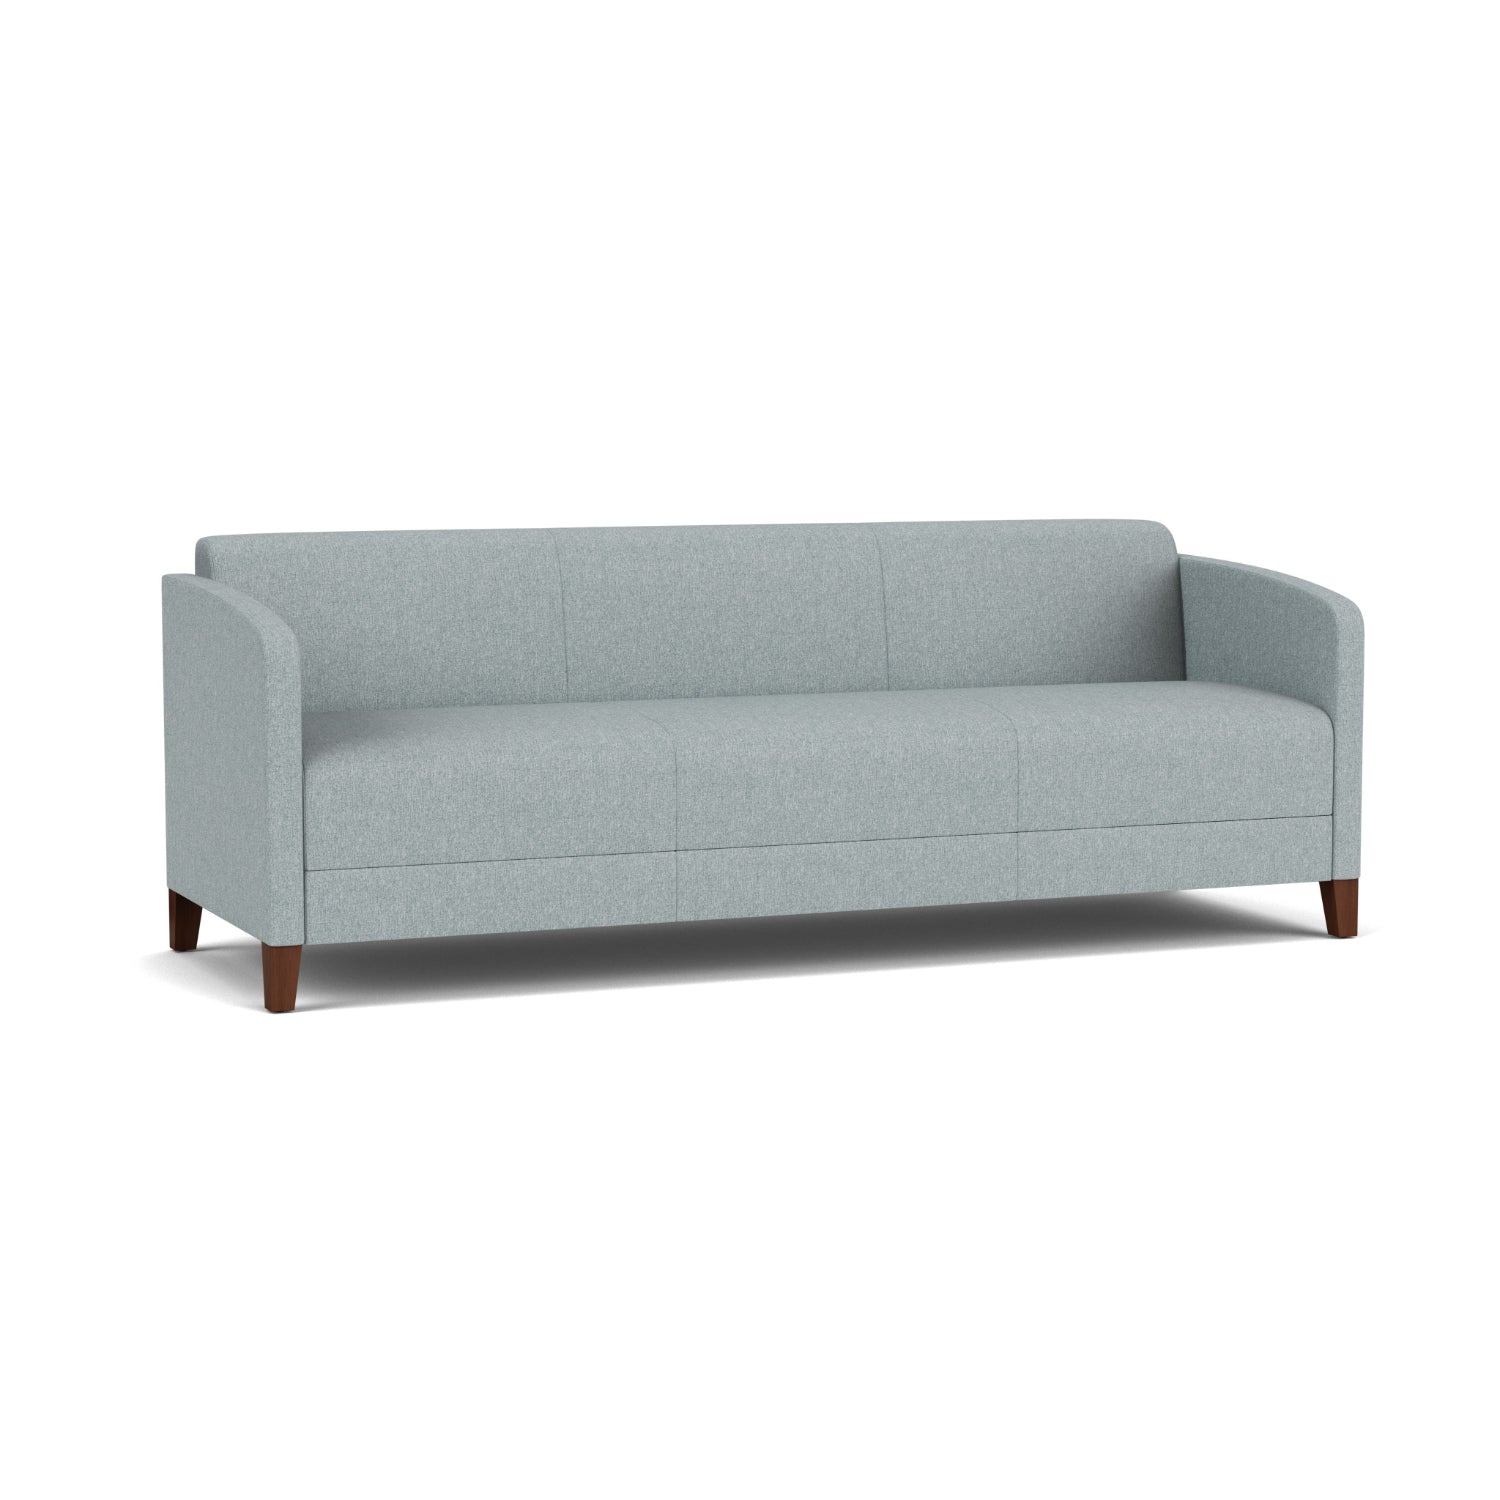 Fremont Collection Reception Seating, Sofa, Healthcare Vinyl Upholstery, FREE SHIPPING